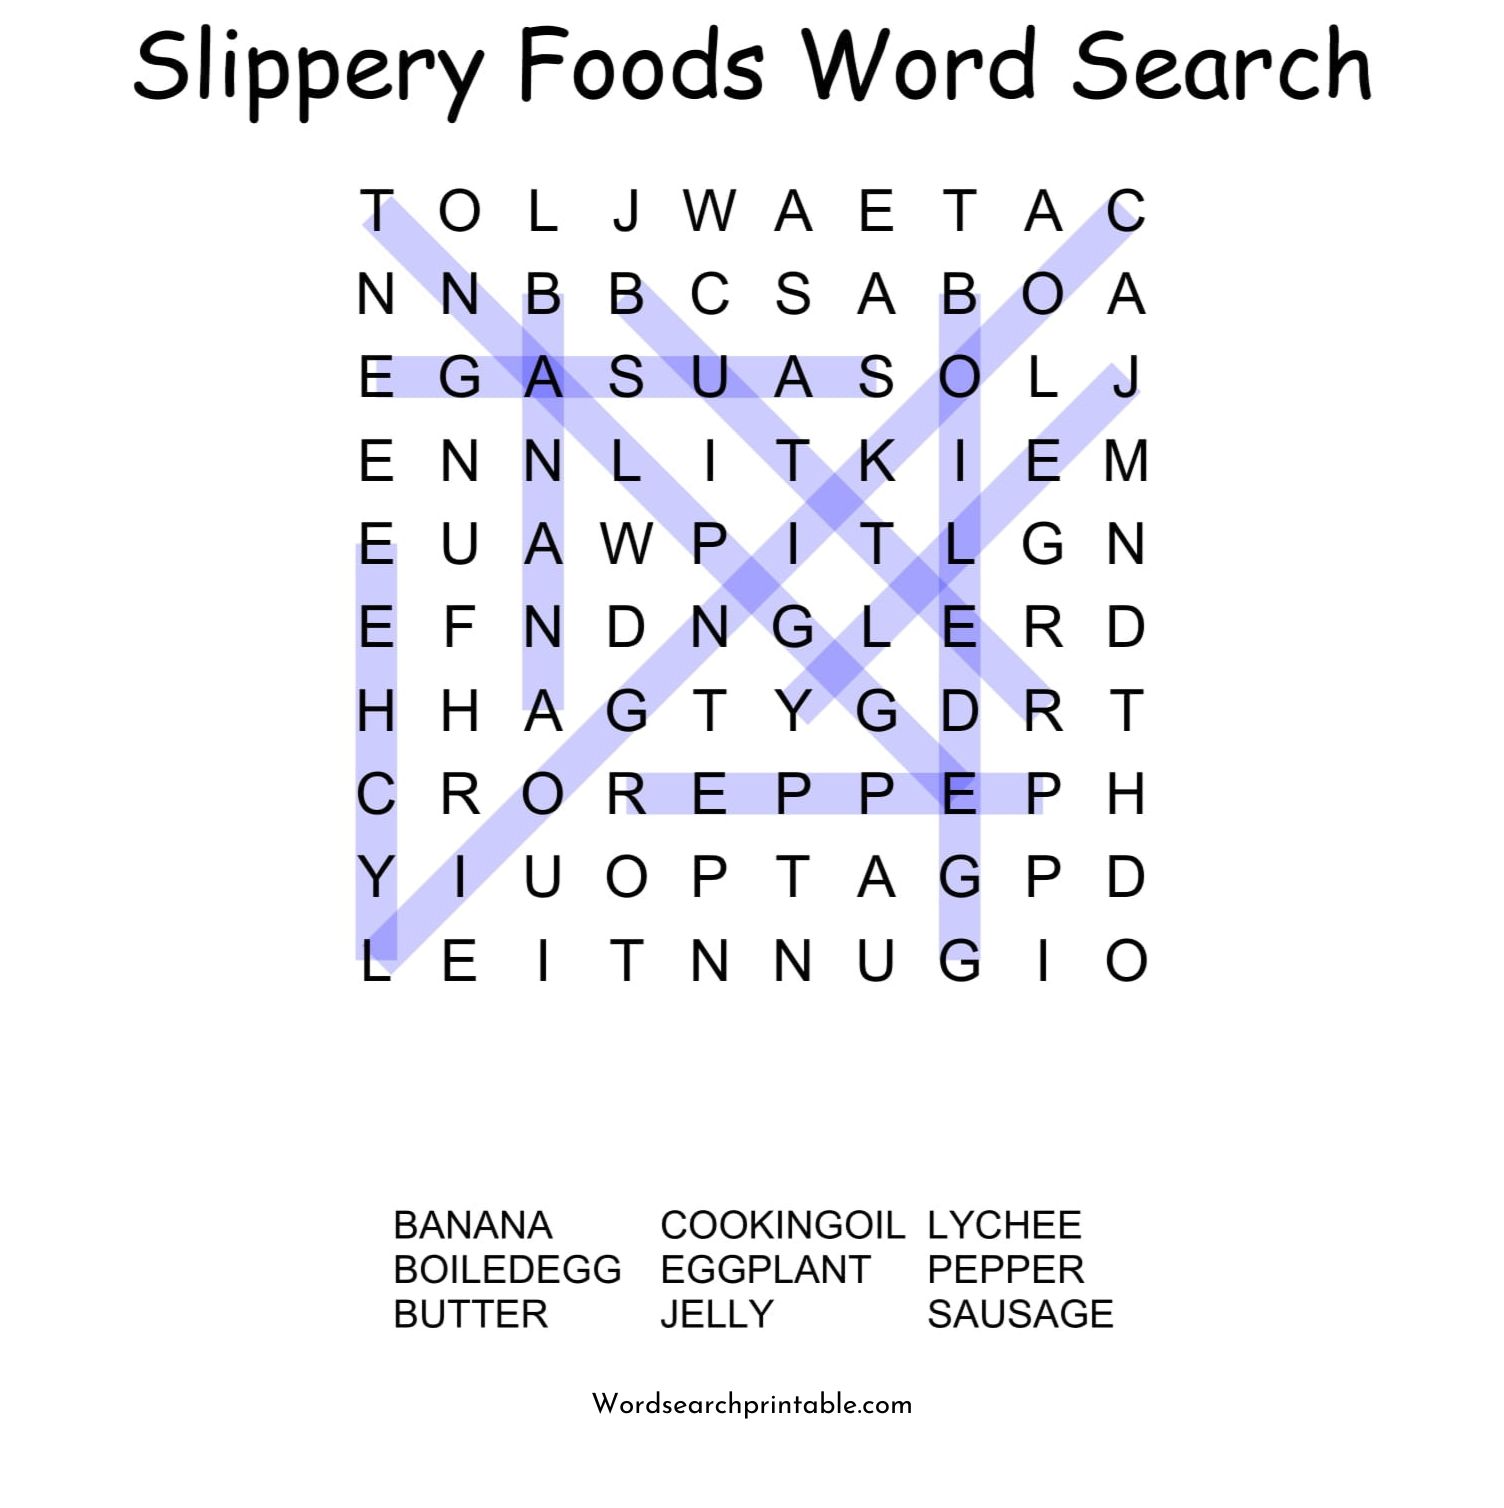 slippery foods word search puzzle solution